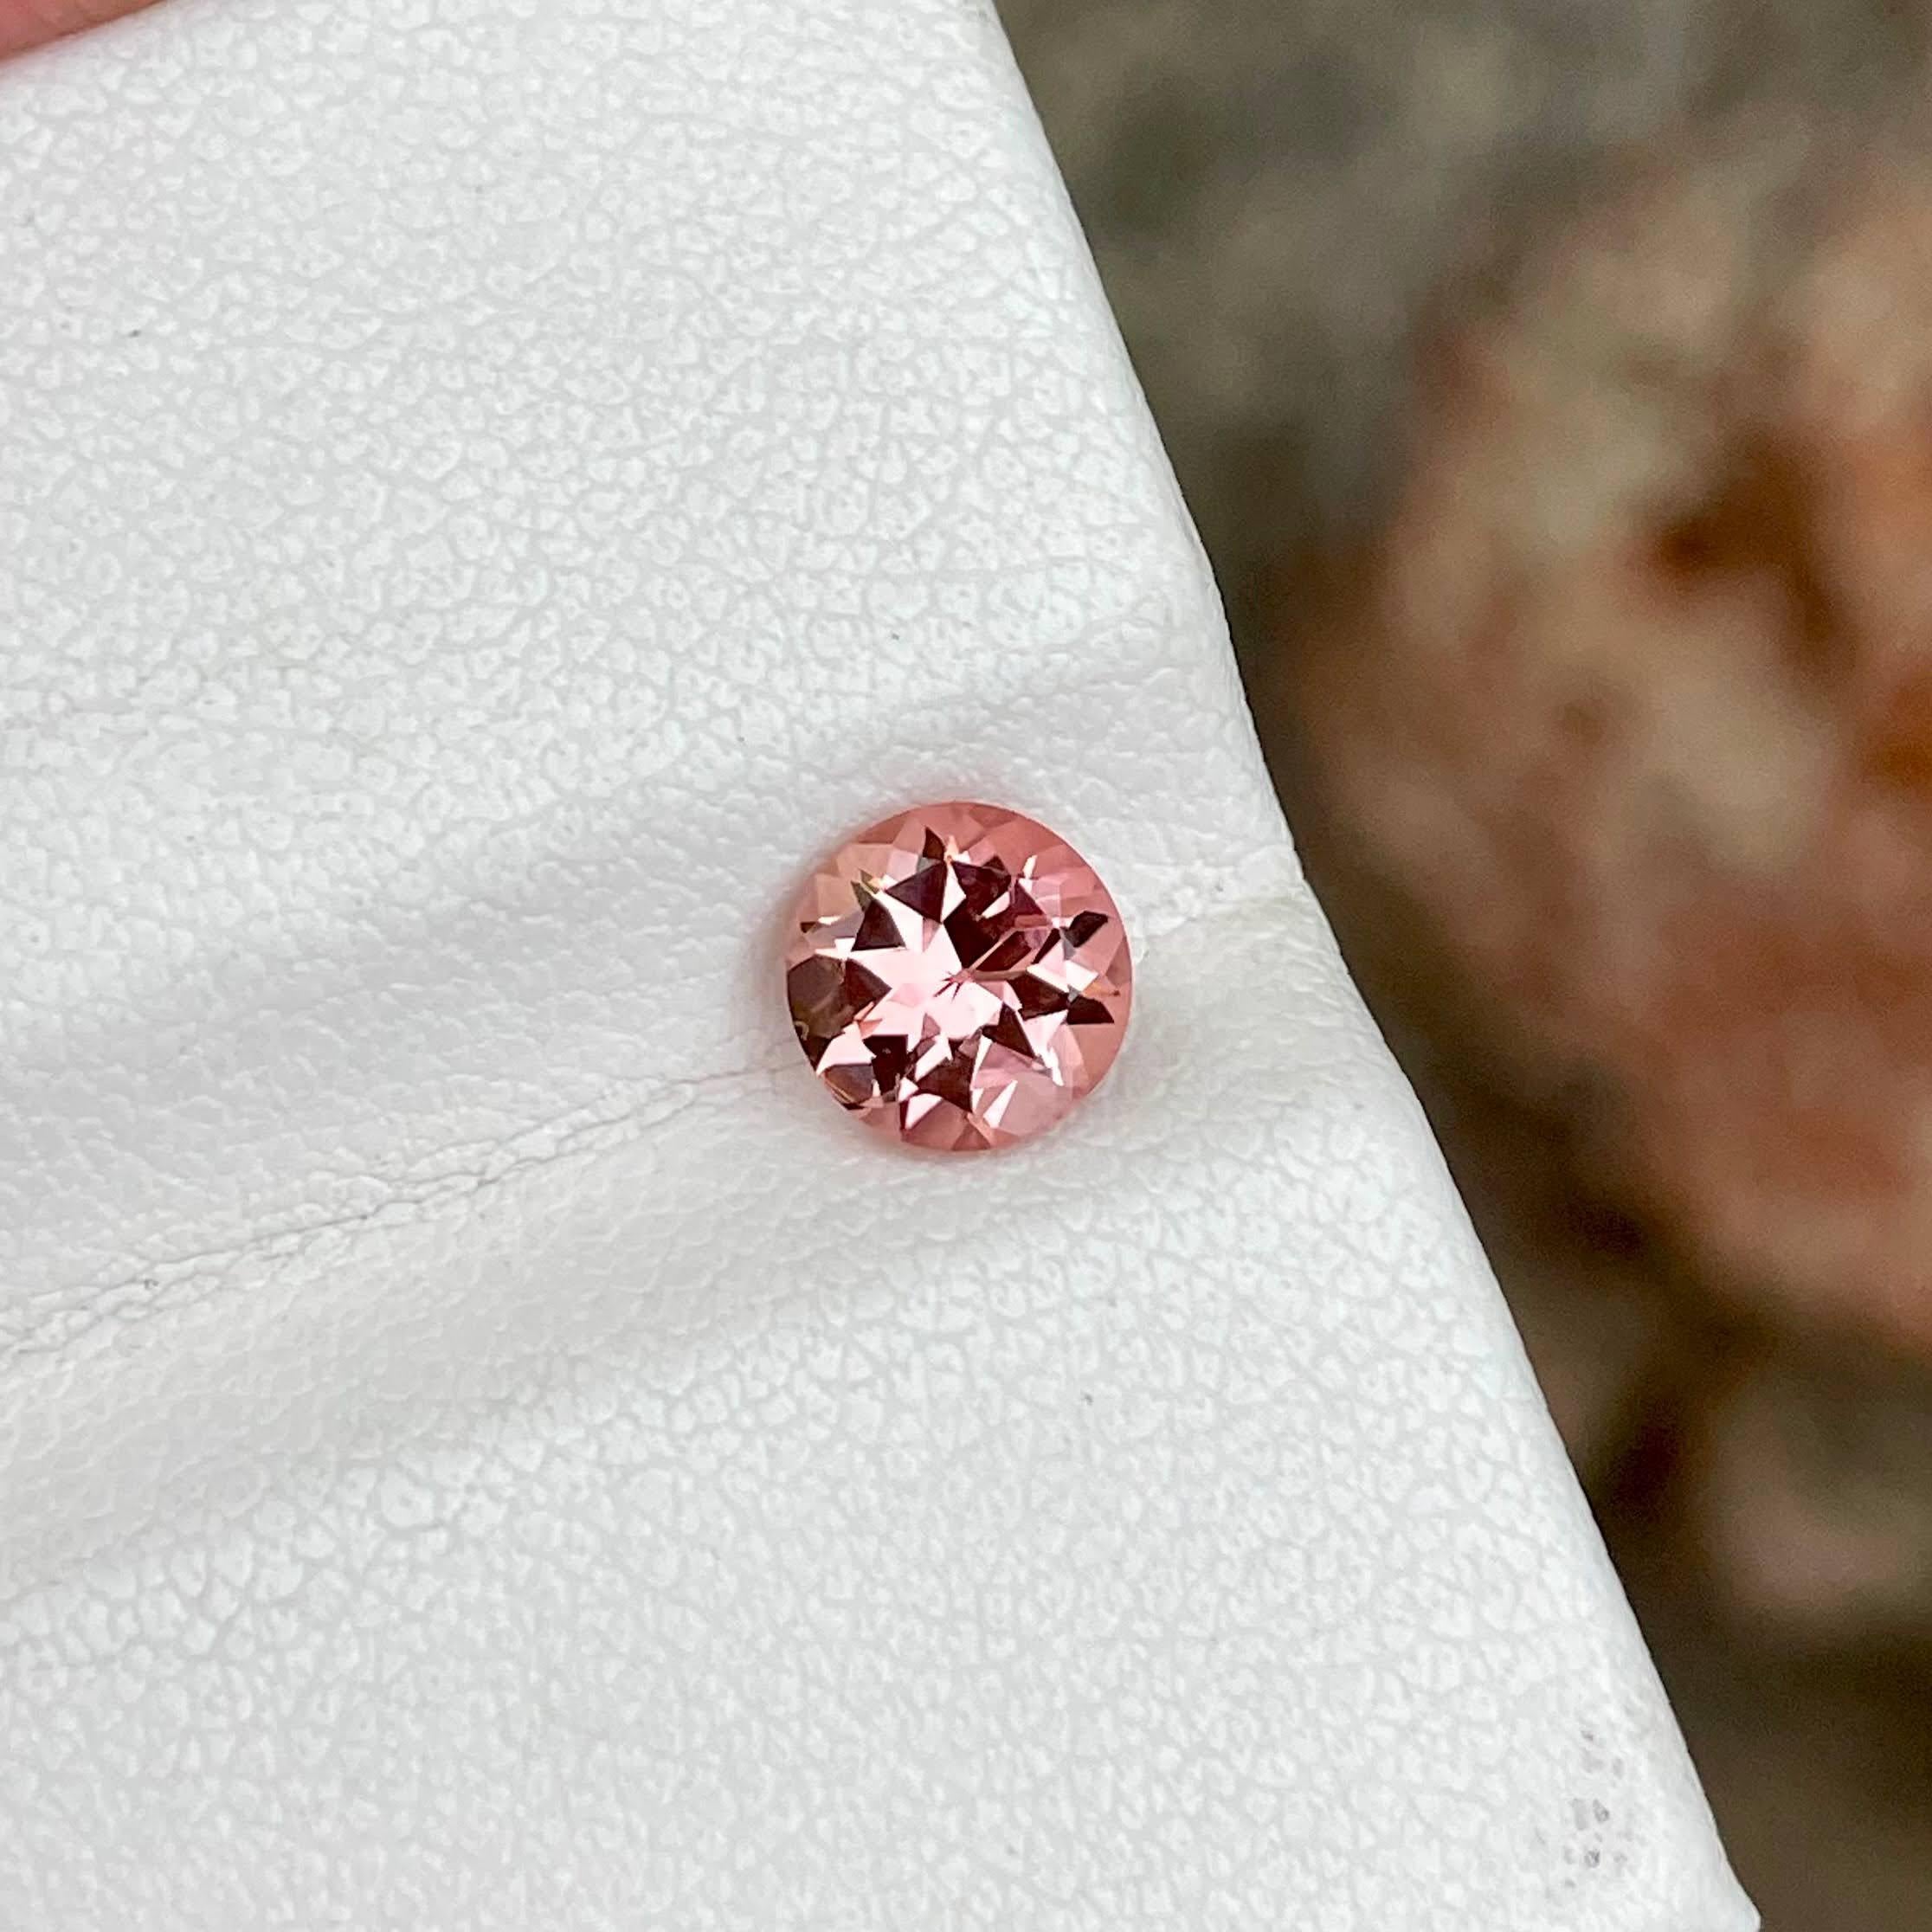 Weight 0.85 carats 
Dimensions 6.1x6.1x3.9 mm
Treatment none 
Origin Afghanistan 
Clarity eye clean 
Shape round 
Cut round brilliant 



This captivating 0.85 carat Pink Tourmaline Stone is a true gem, meticulously round-cut to perfection.